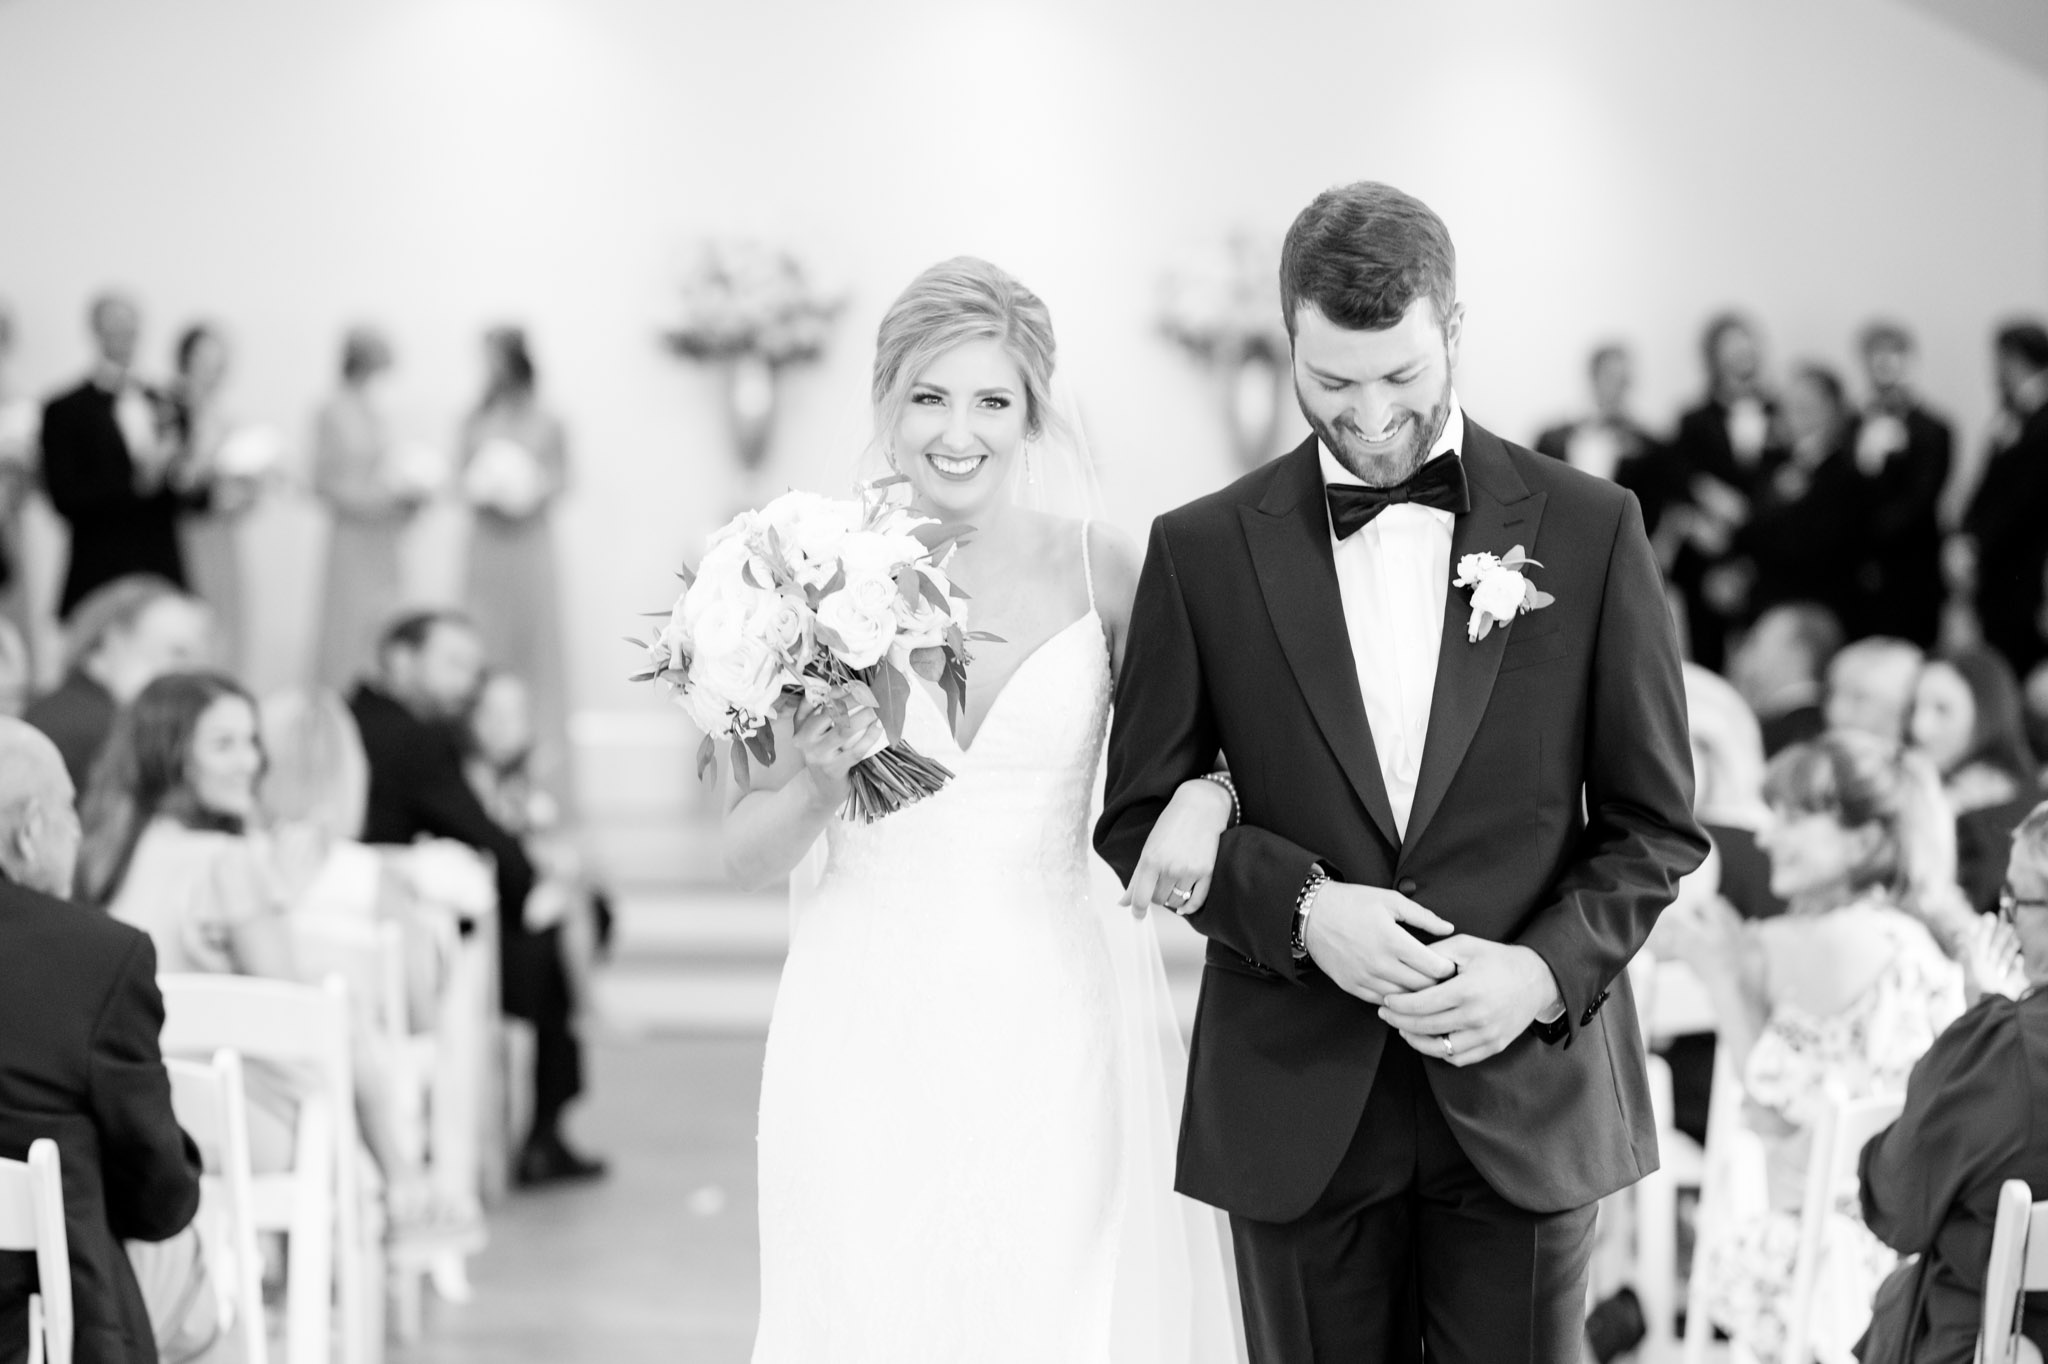 Bride and groom smile as they walk up aisle.